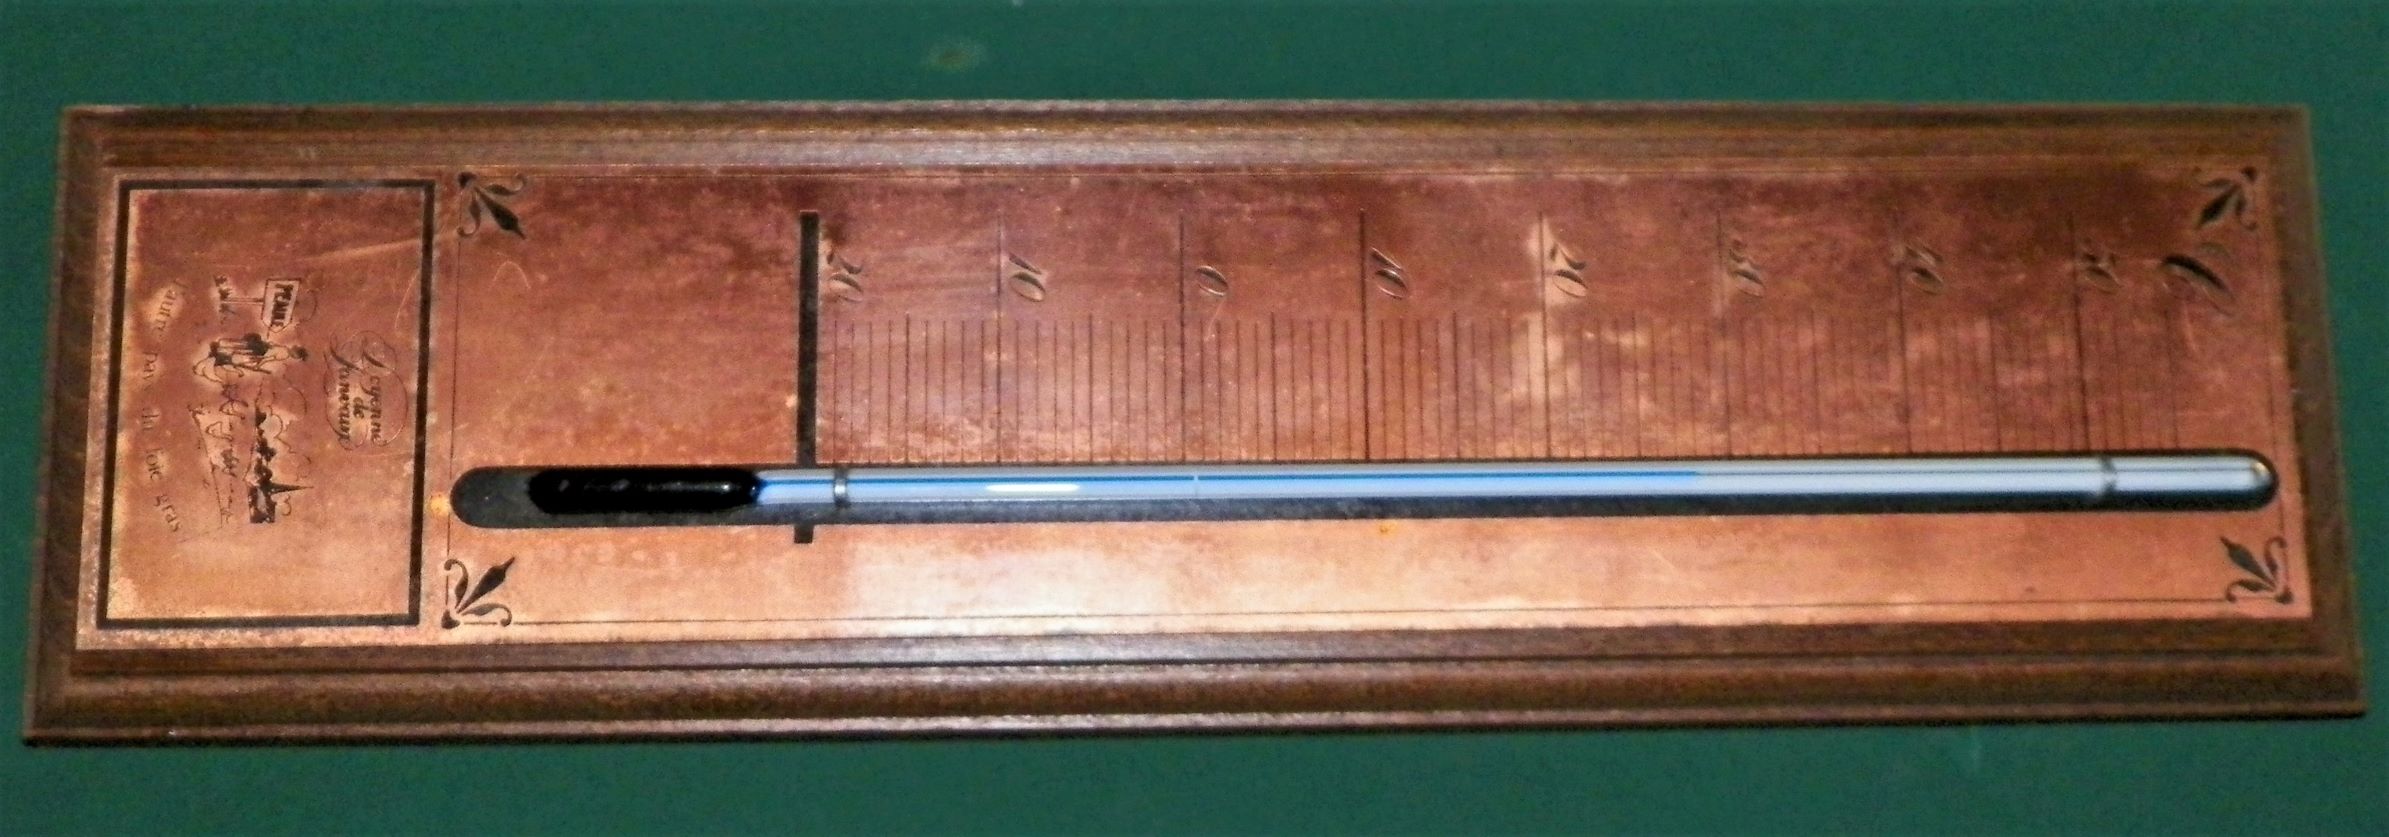 collectible thermometer copper 1aa.JPG